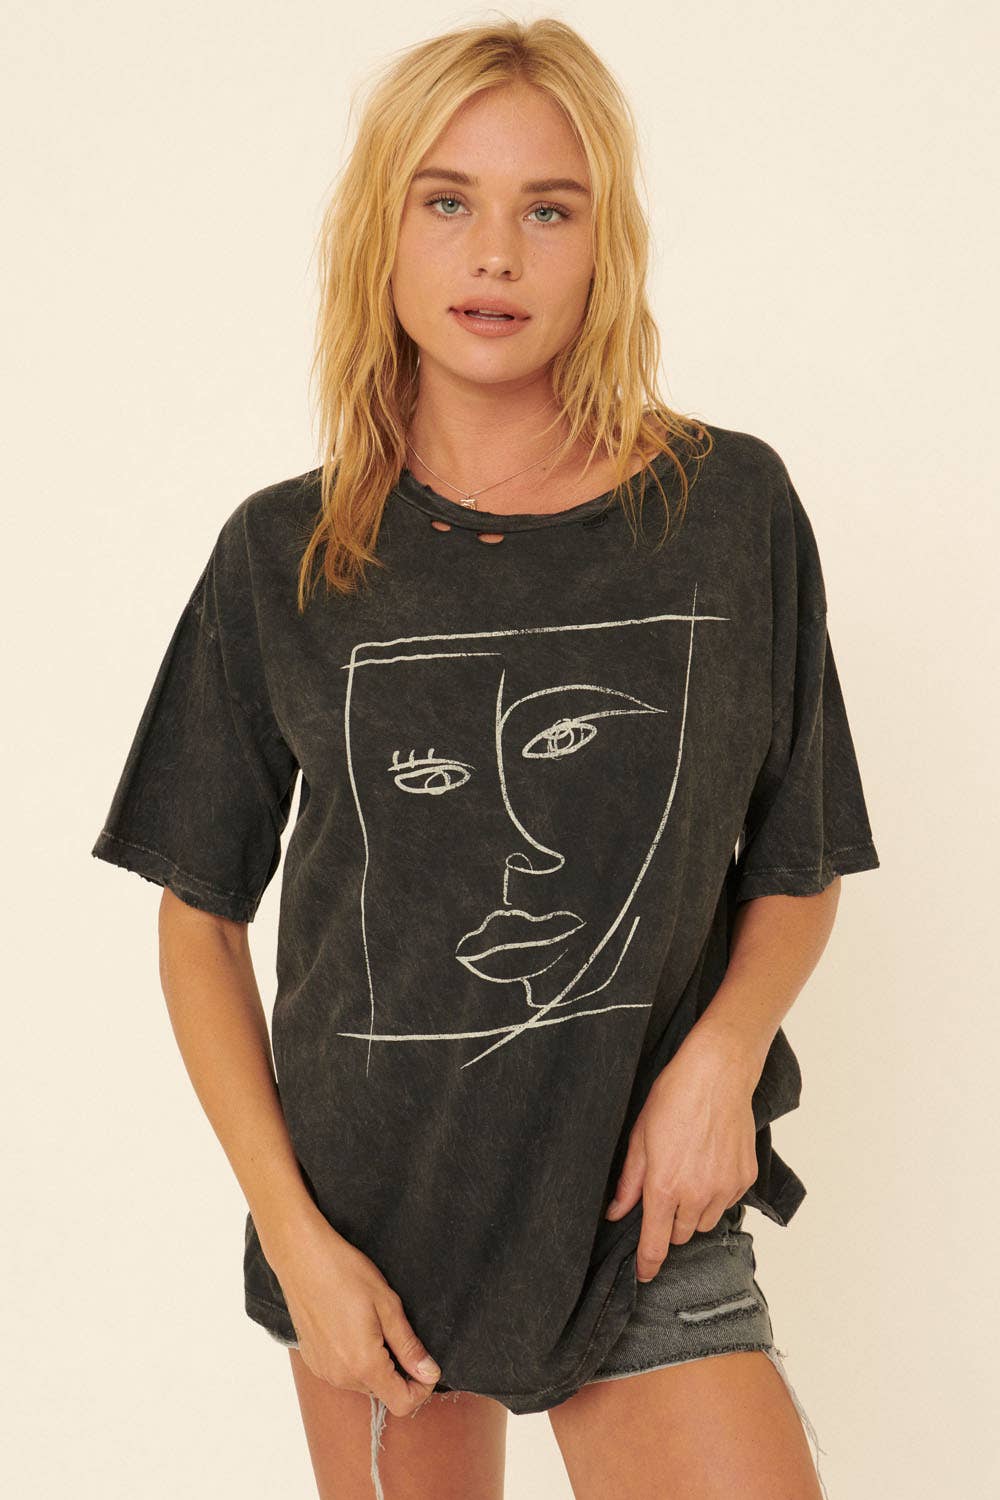 Mineral Washed Abstract Faces Graphic Tee